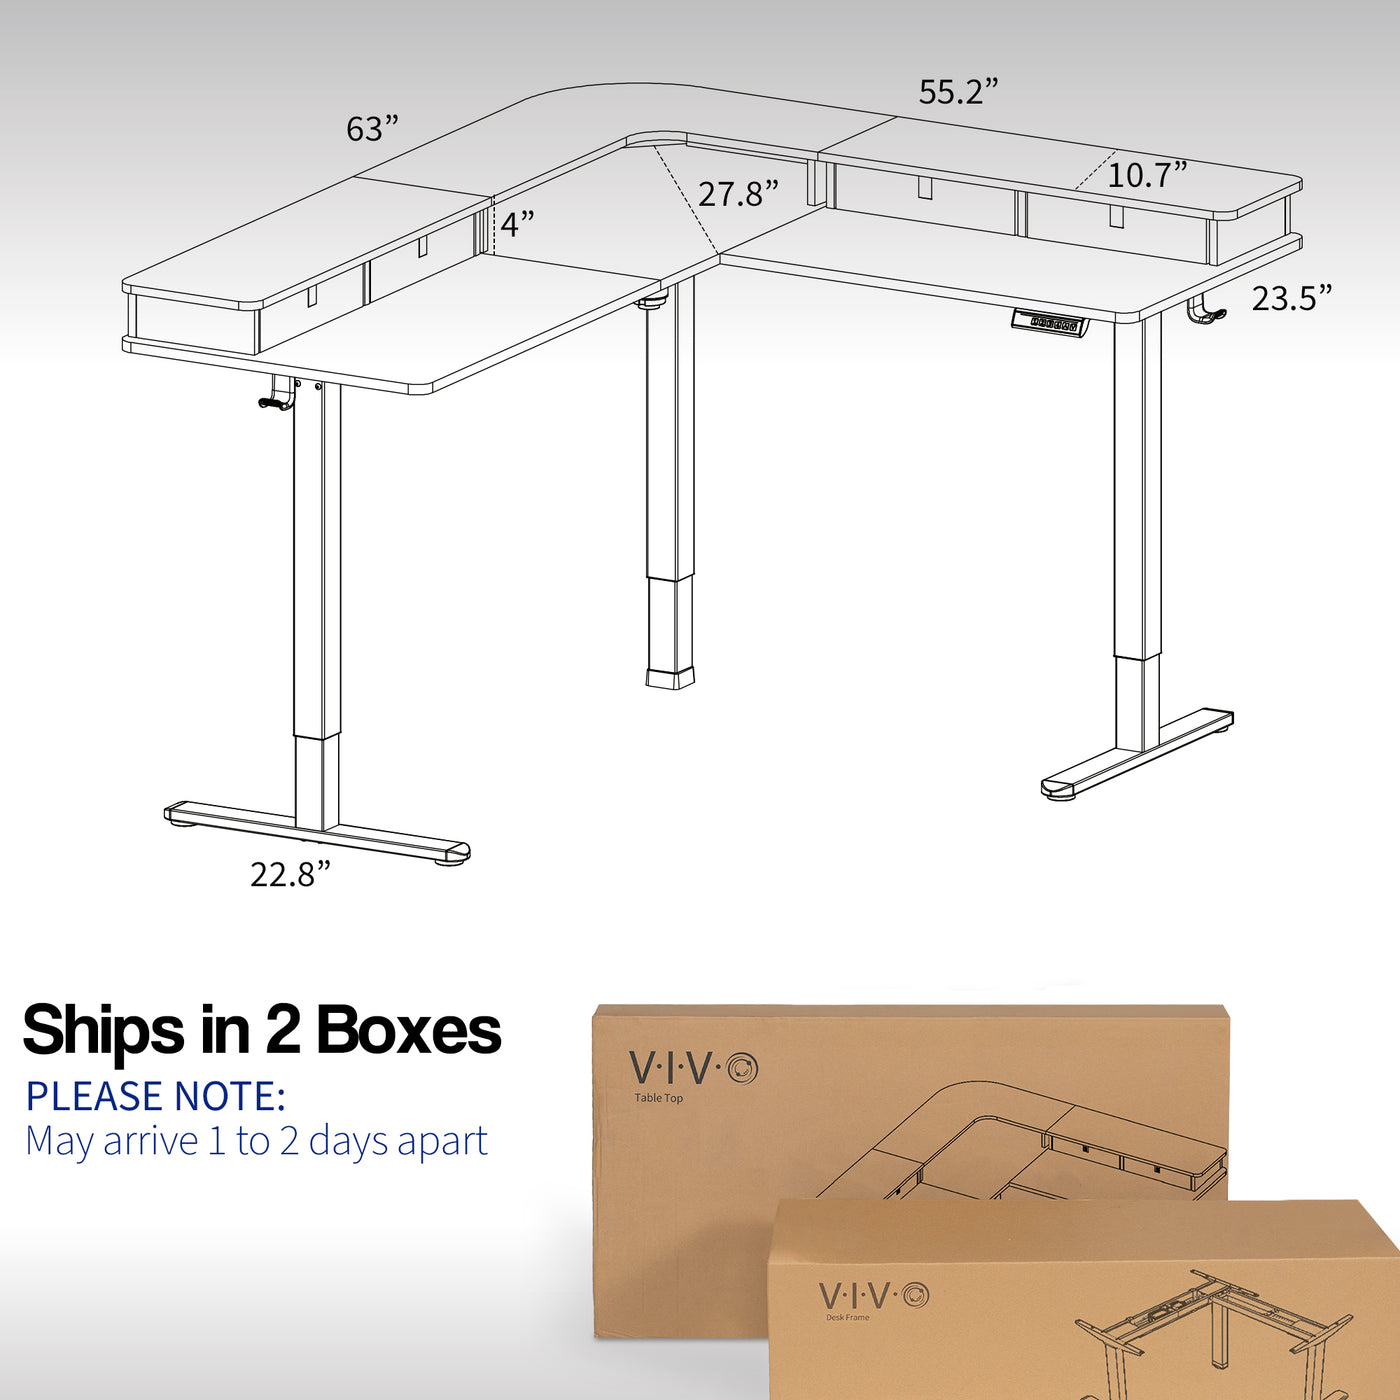 Please note the desk will arrive in two boxes and have the potential to arrive at separate times.